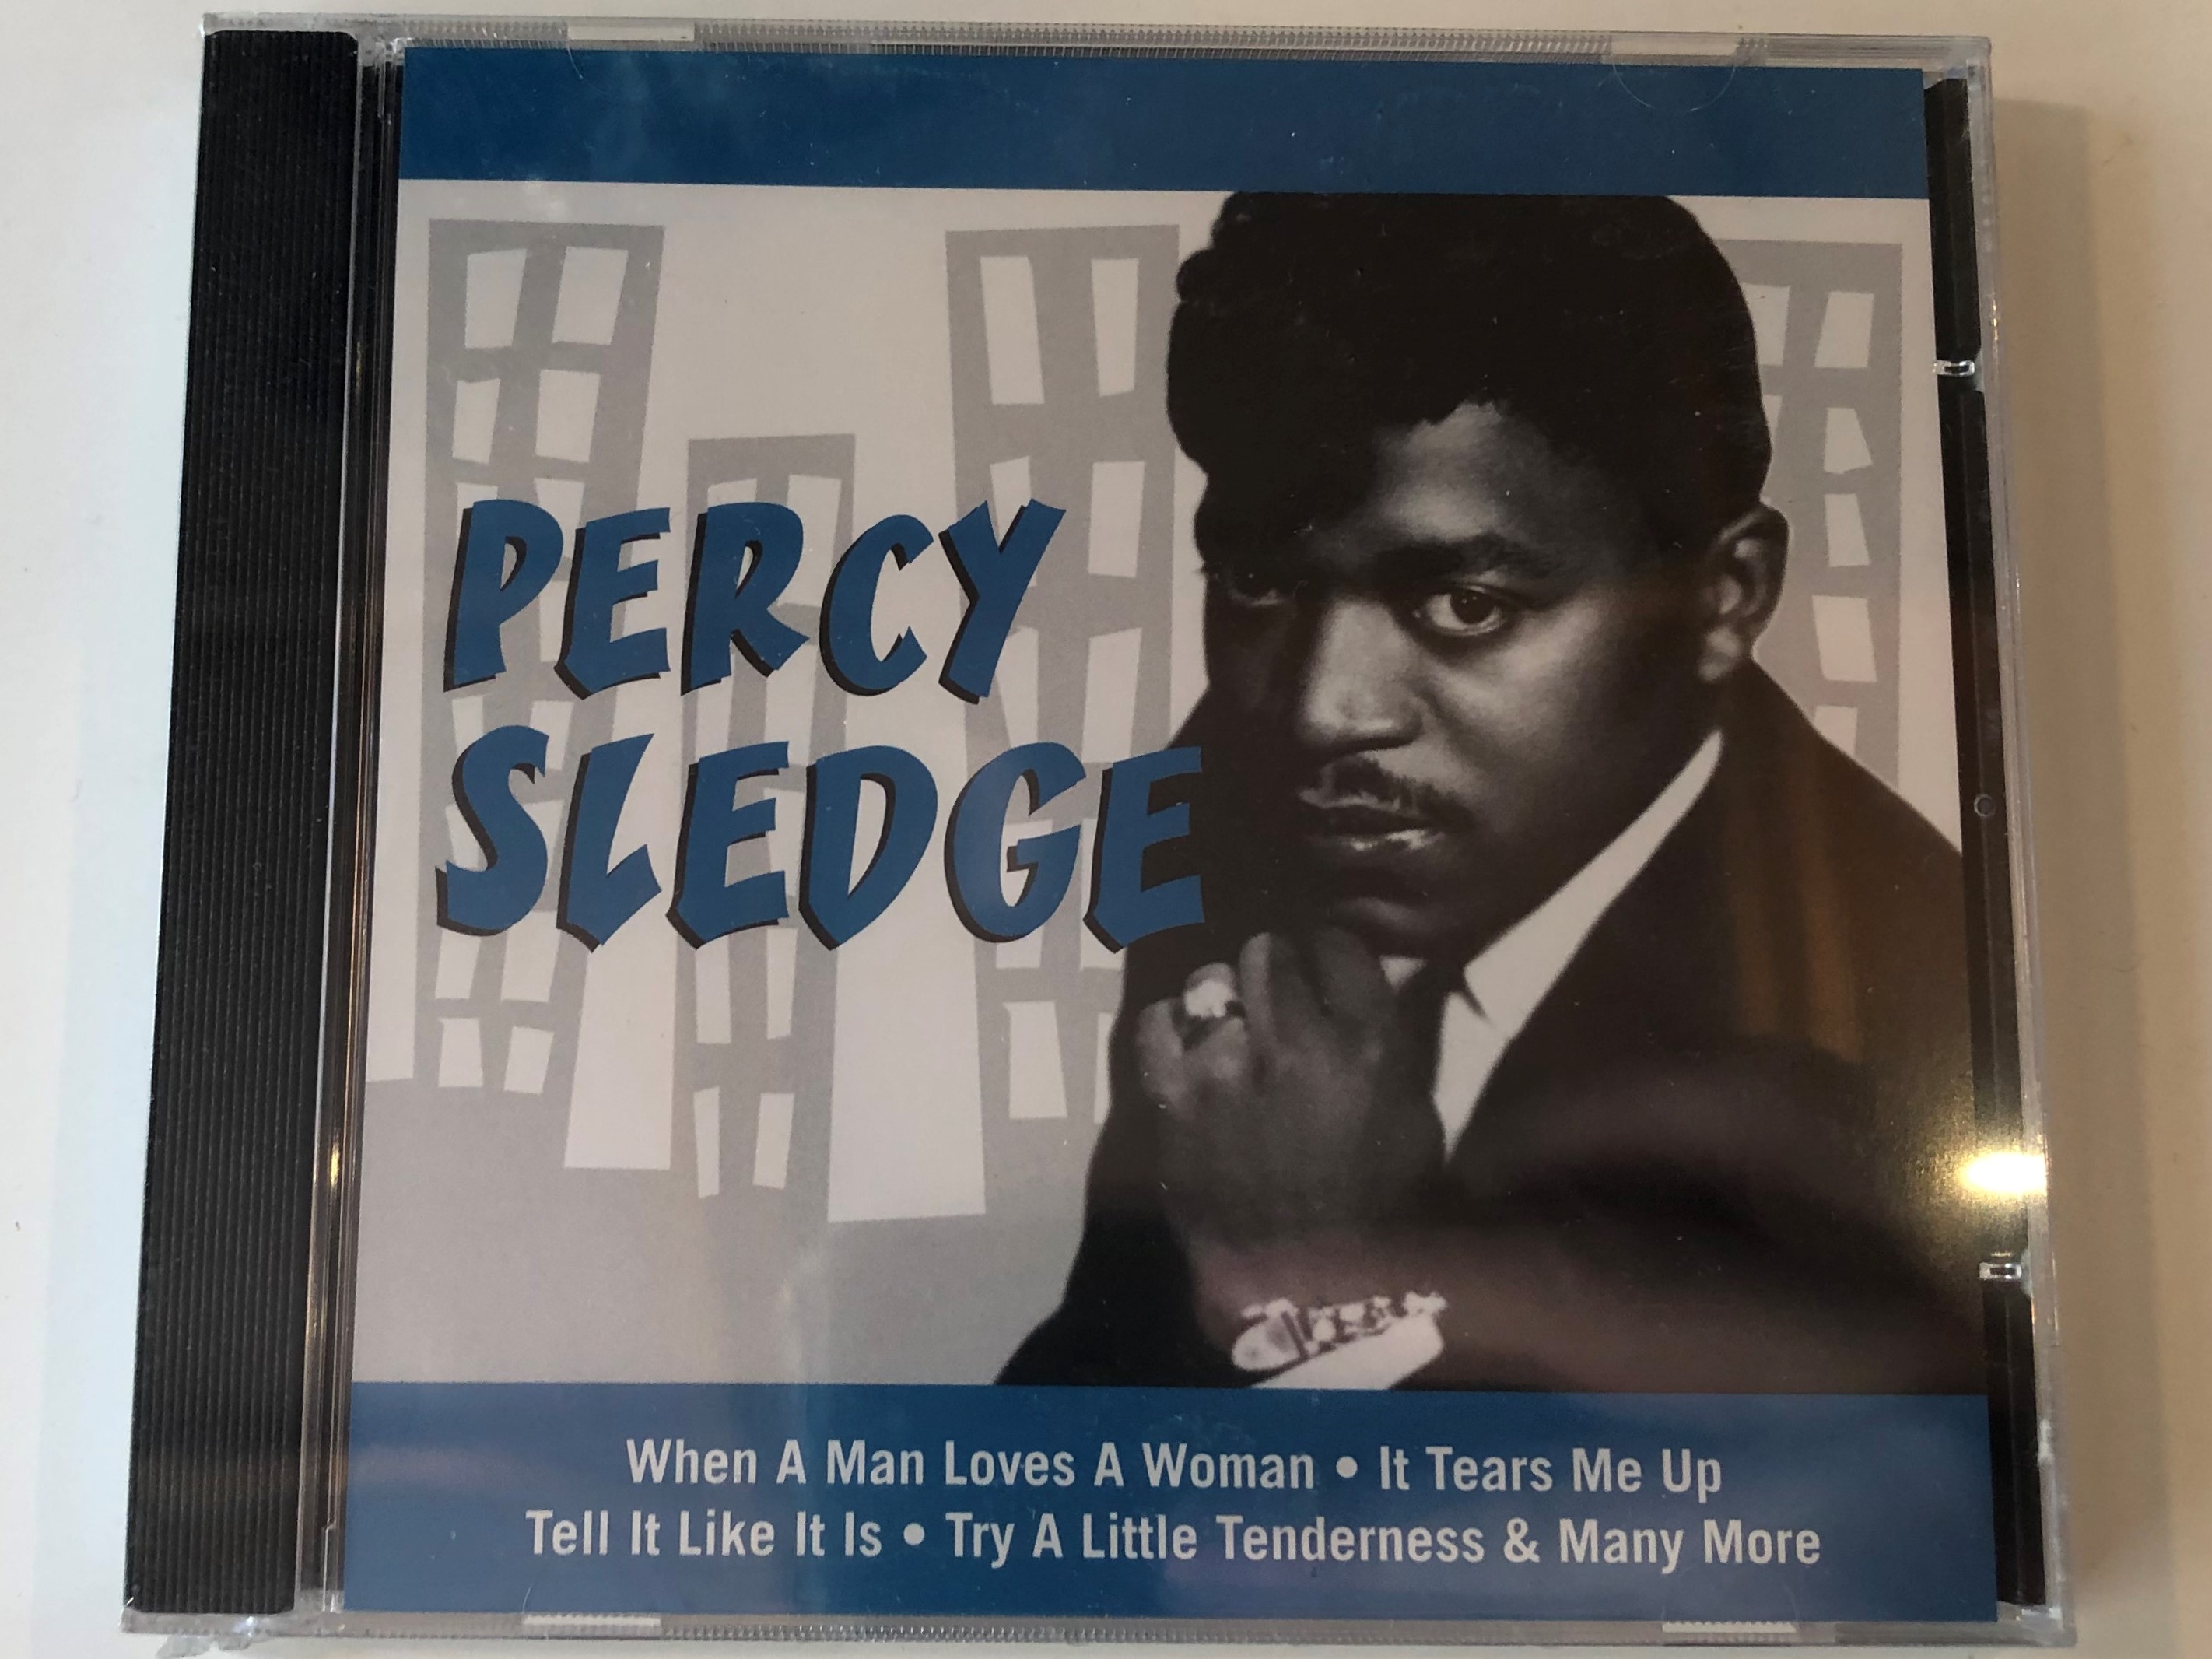 percy-sledge-when-a-man-loves-a-woman-it-tears-me-up-tell-it-like-it-is-try-a-little-tenderness-many-more-fox-music-consolidated-ltd.-audio-cd-fu-1040-1-.jpg